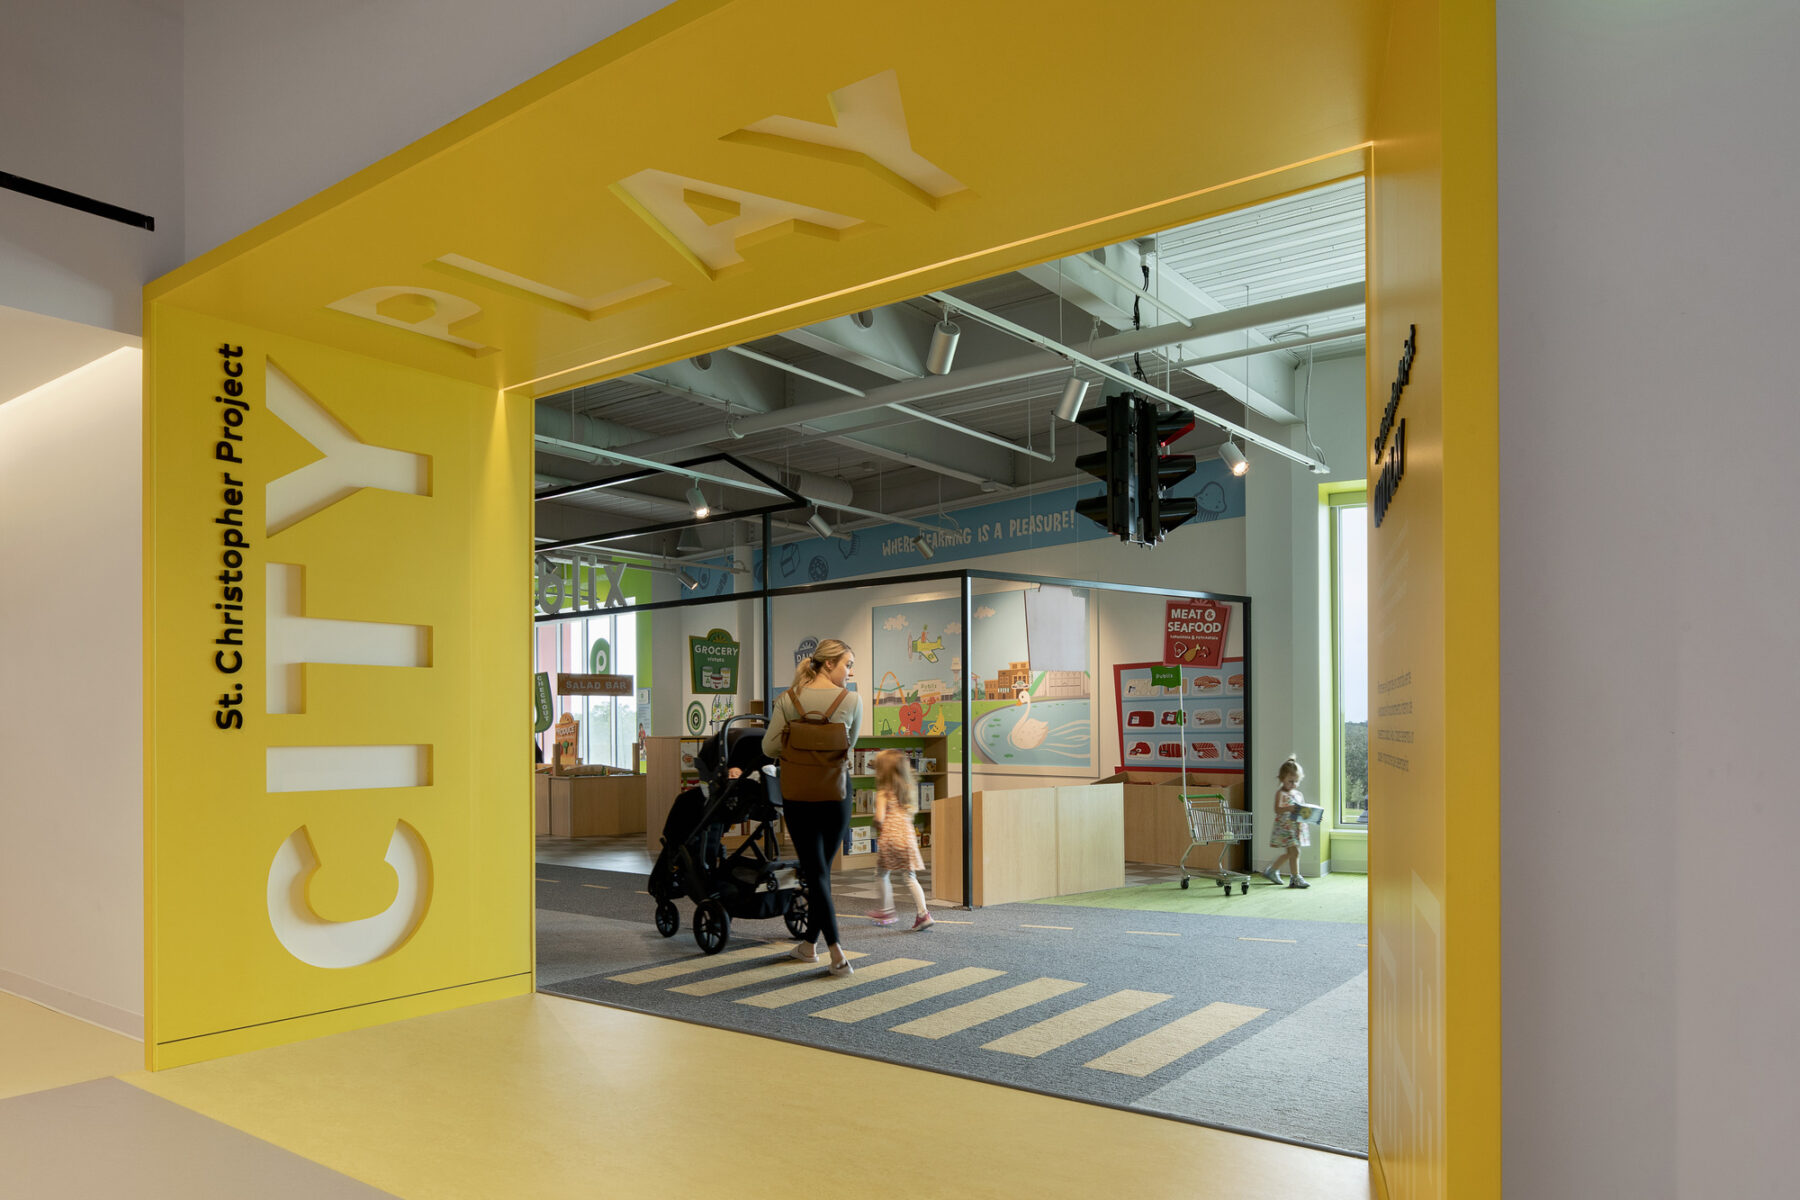 photograph of bright yellow entryway into City Play exhibit at florida childrens museum